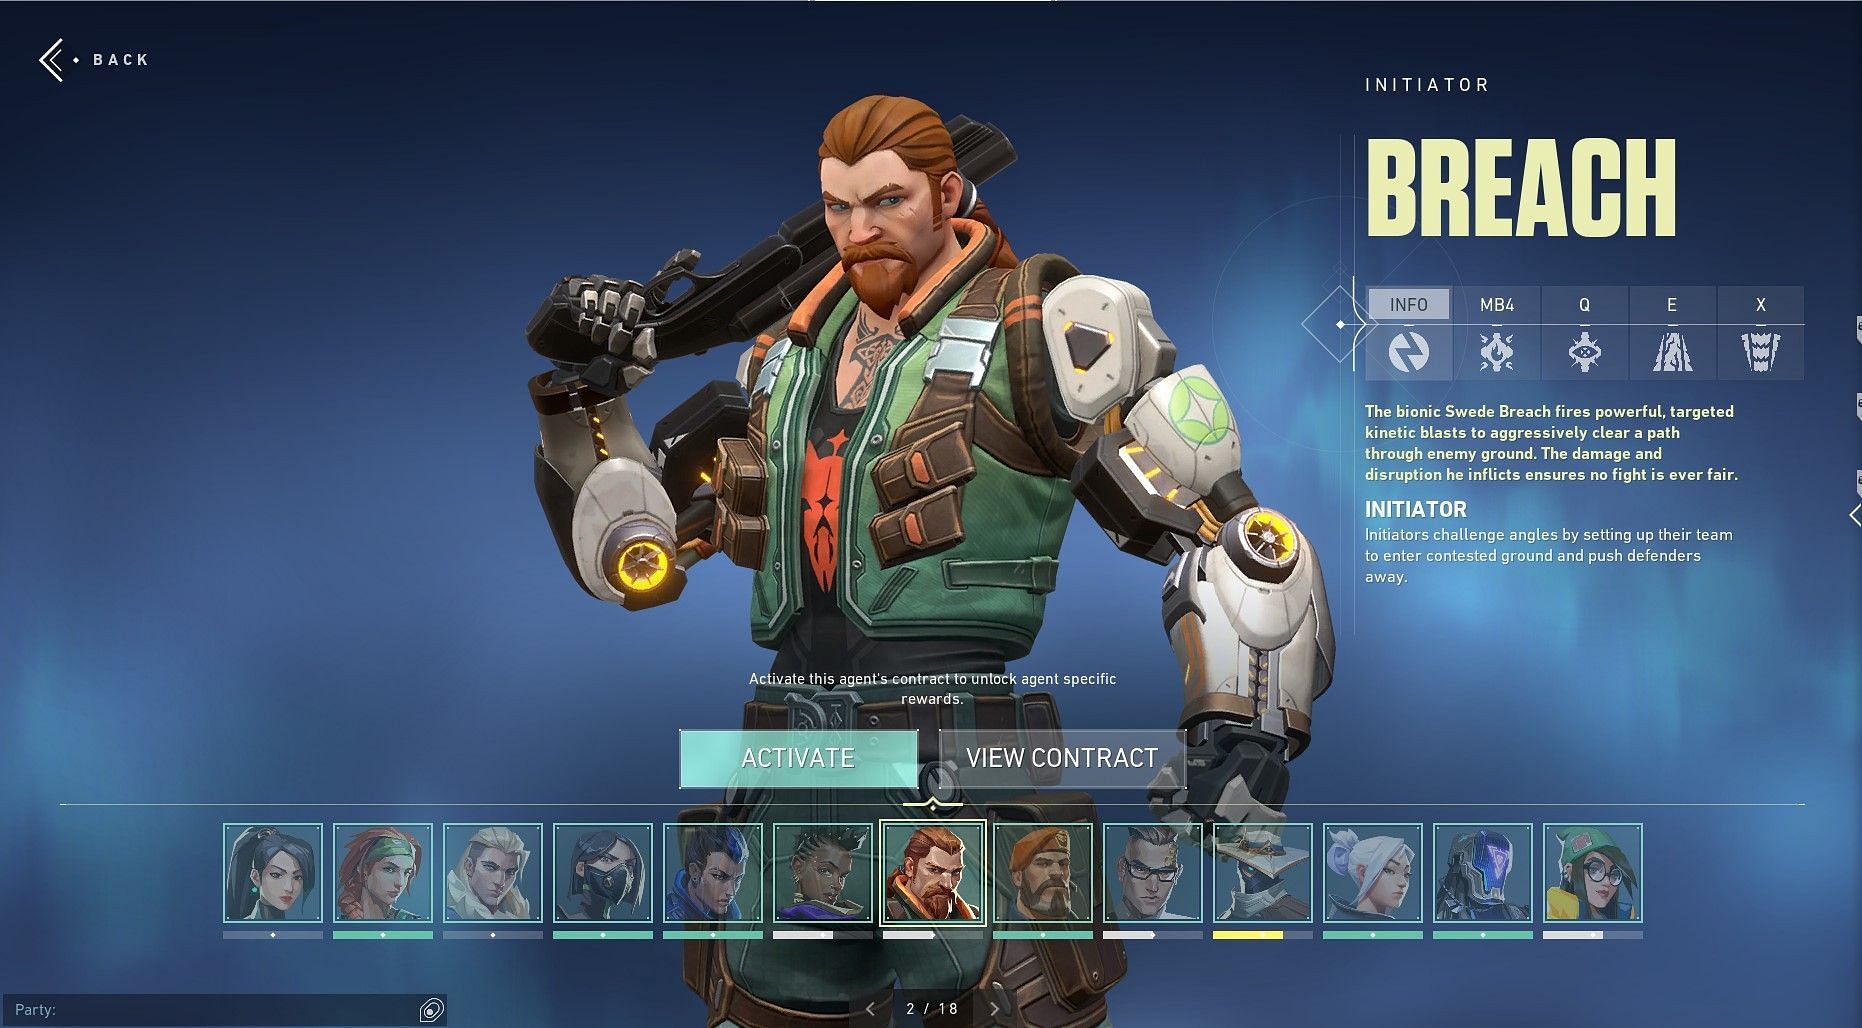 Breach is another initiator agent in Valorant (Image via Riot Games)